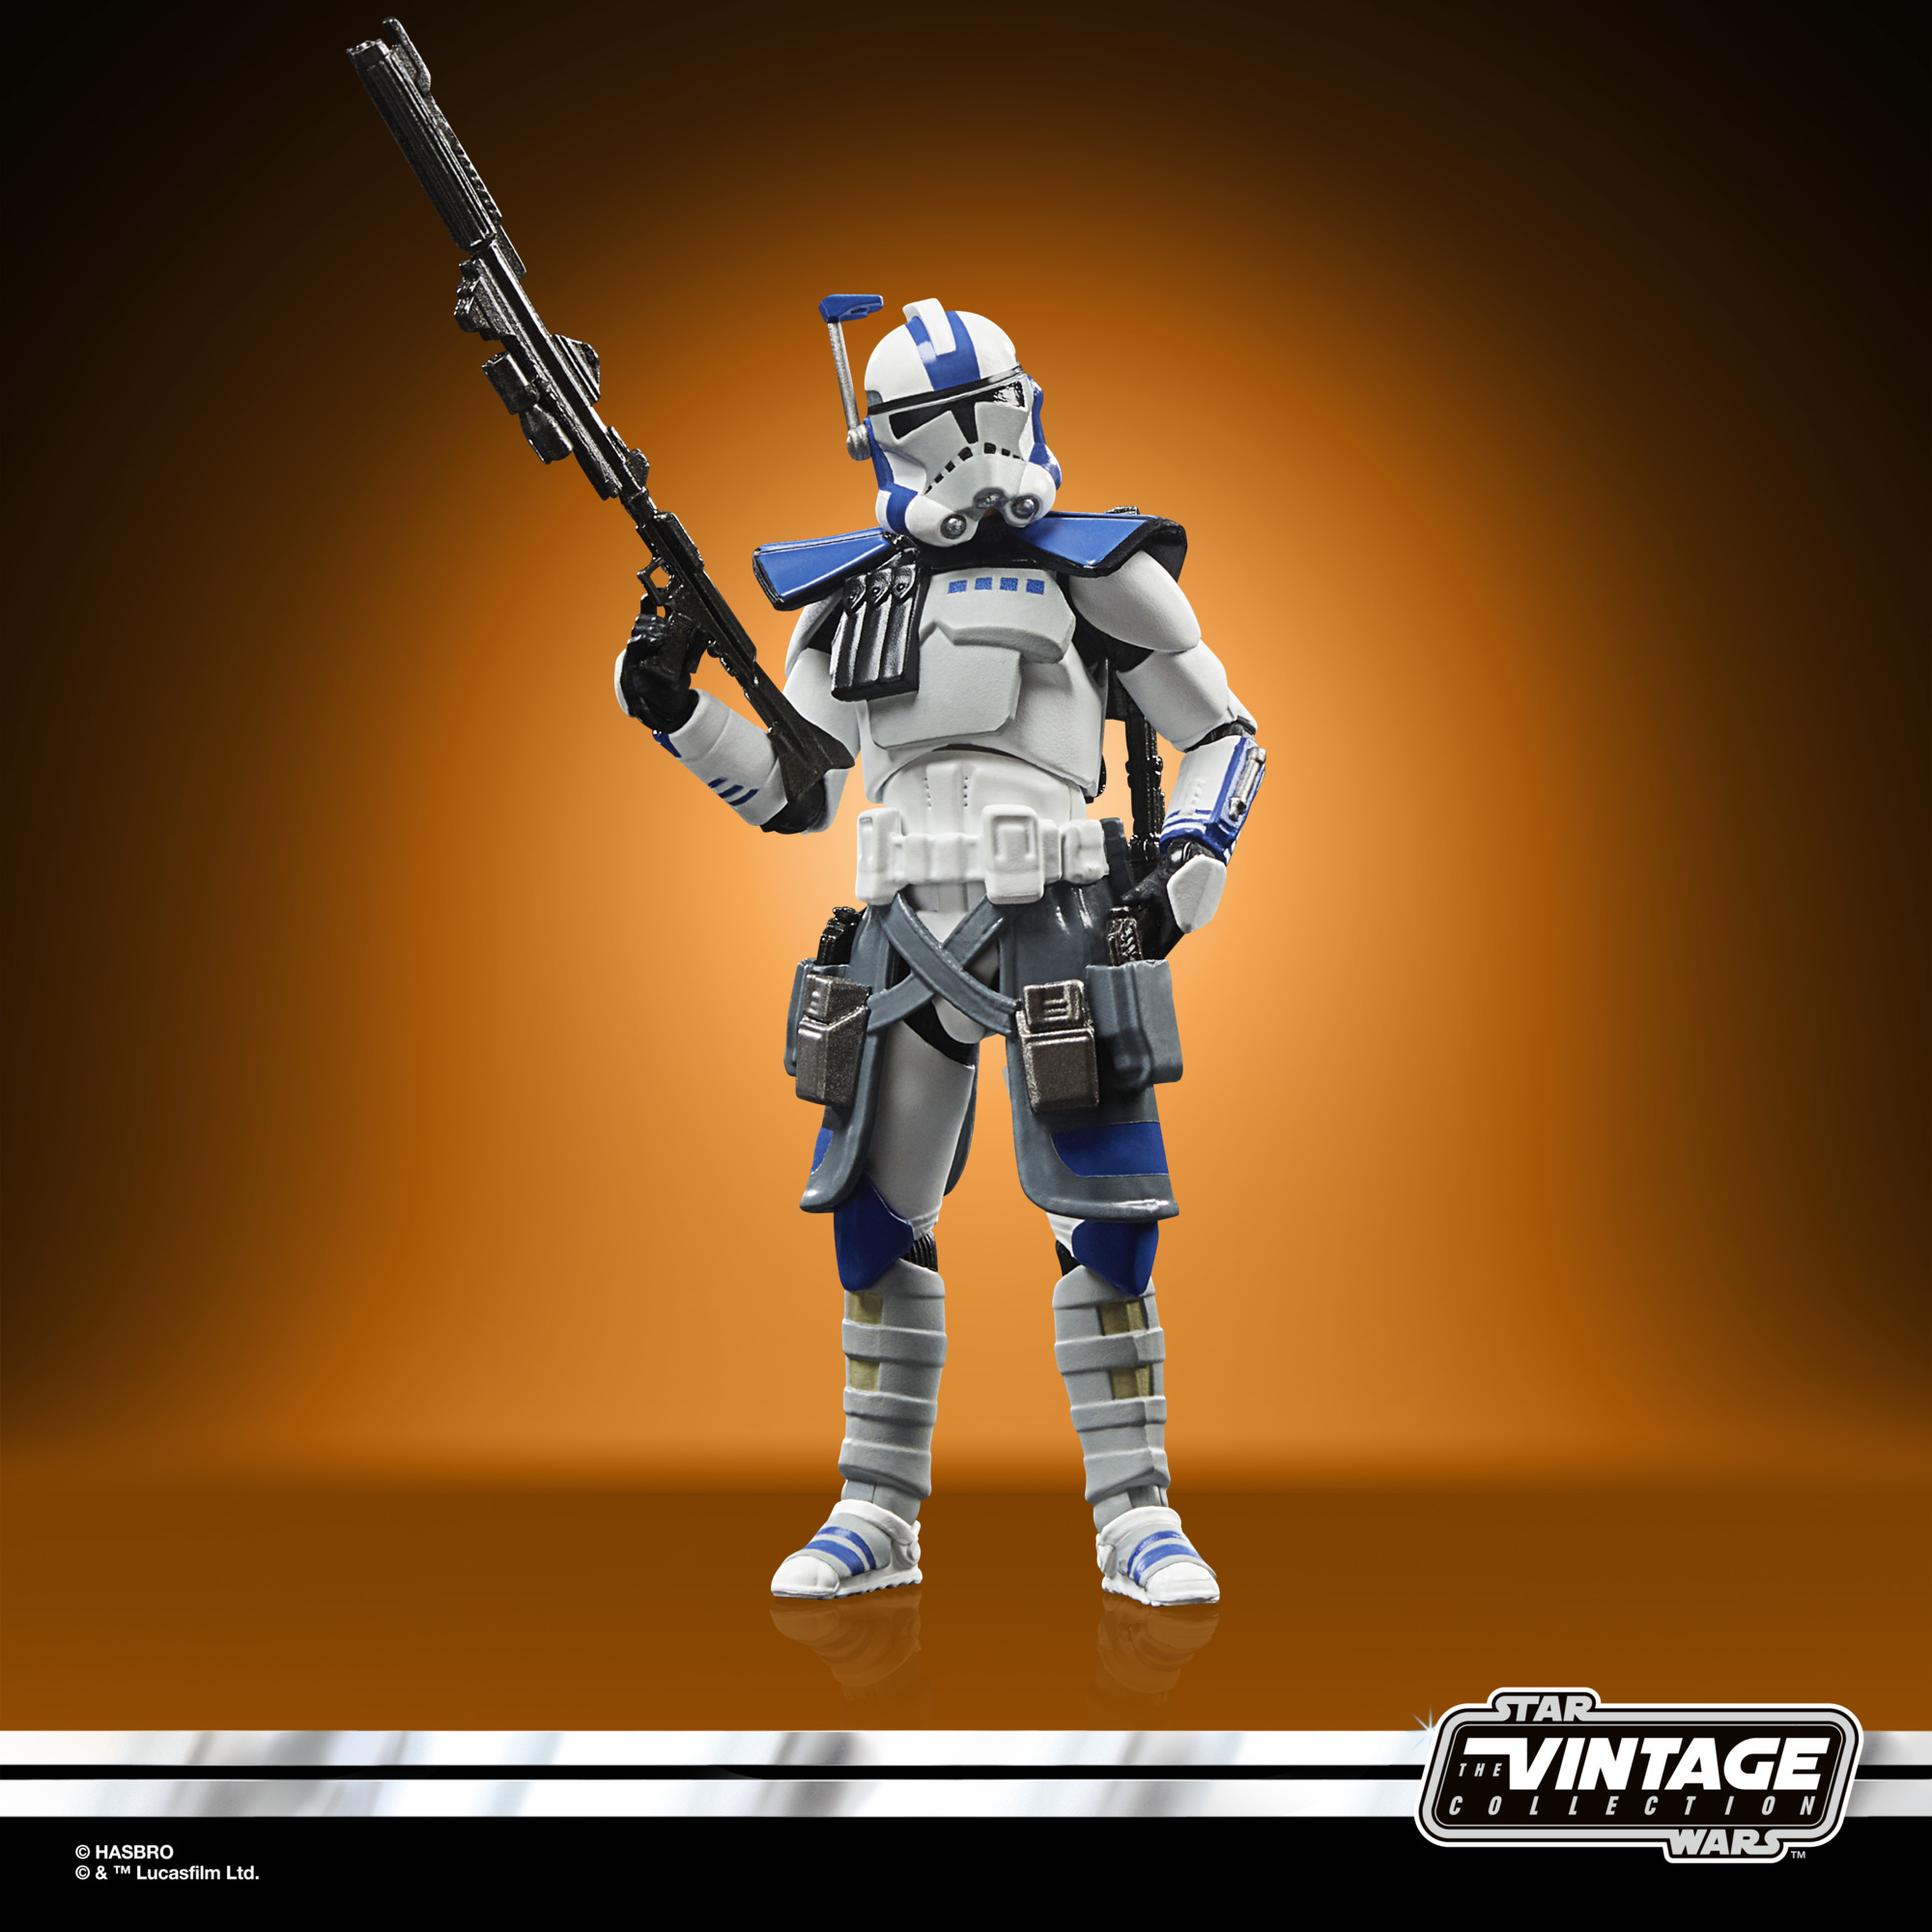 Star Wars: The Clone Wars The Vintage Collection ARC Commander Havoc Kids Toy Action Figure for Boys and Girls Ages 4 5 6 7 8 and Up (3.75”) - image 4 of 10